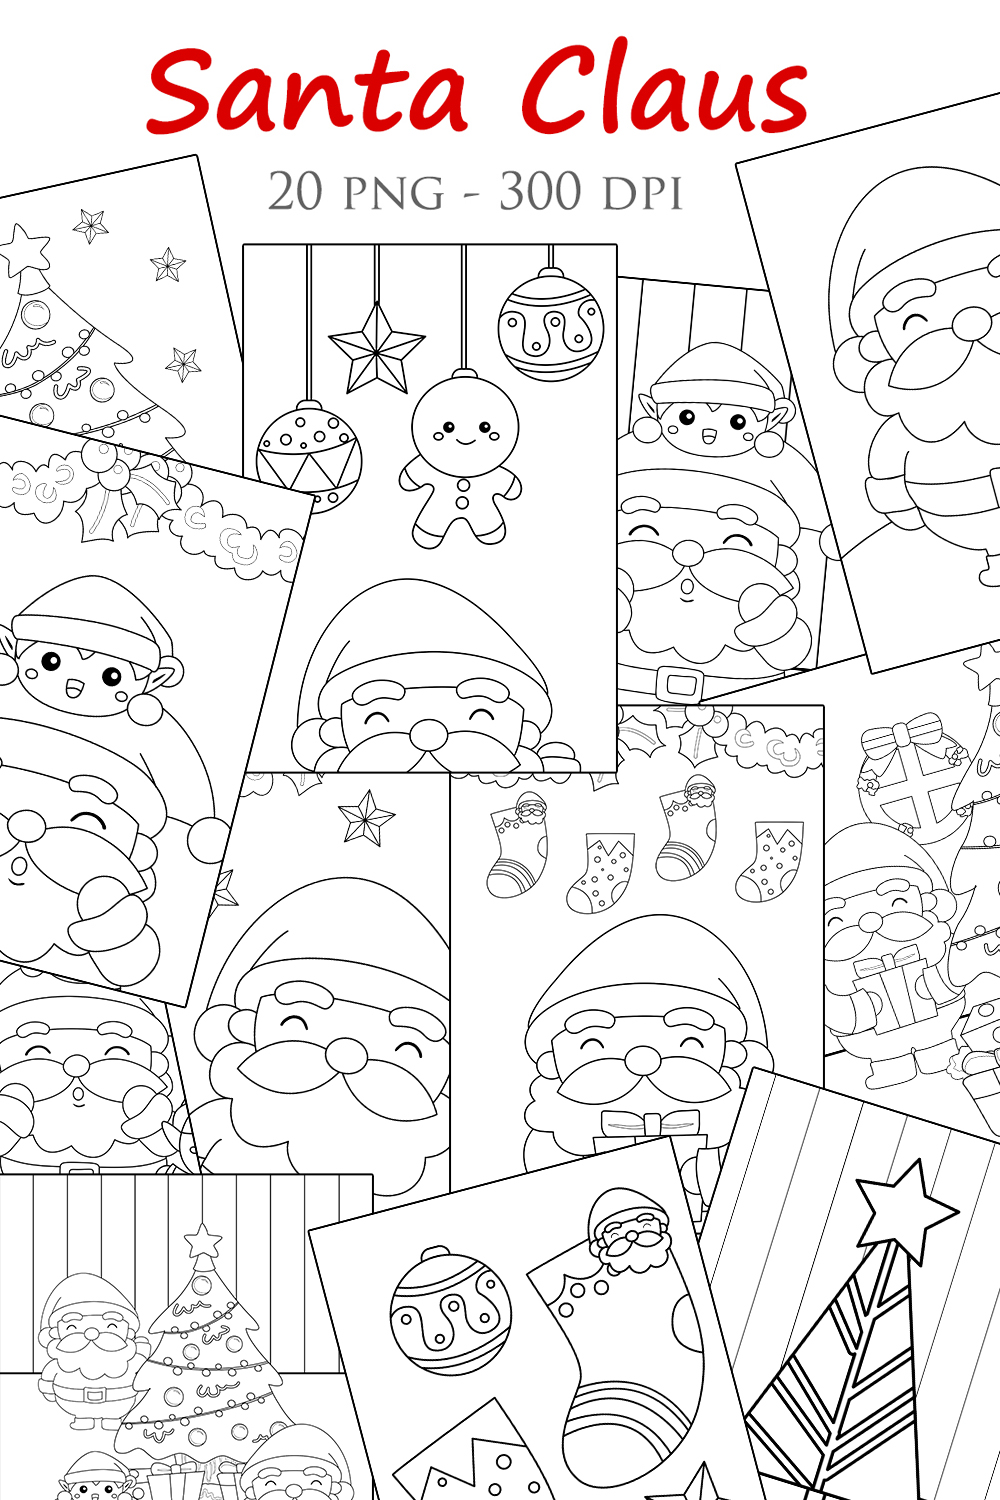 Happy Santa Claus Christmas Holiday Party Decoration with Kids Cartoon Coloring Pages Activity pinterest preview image.